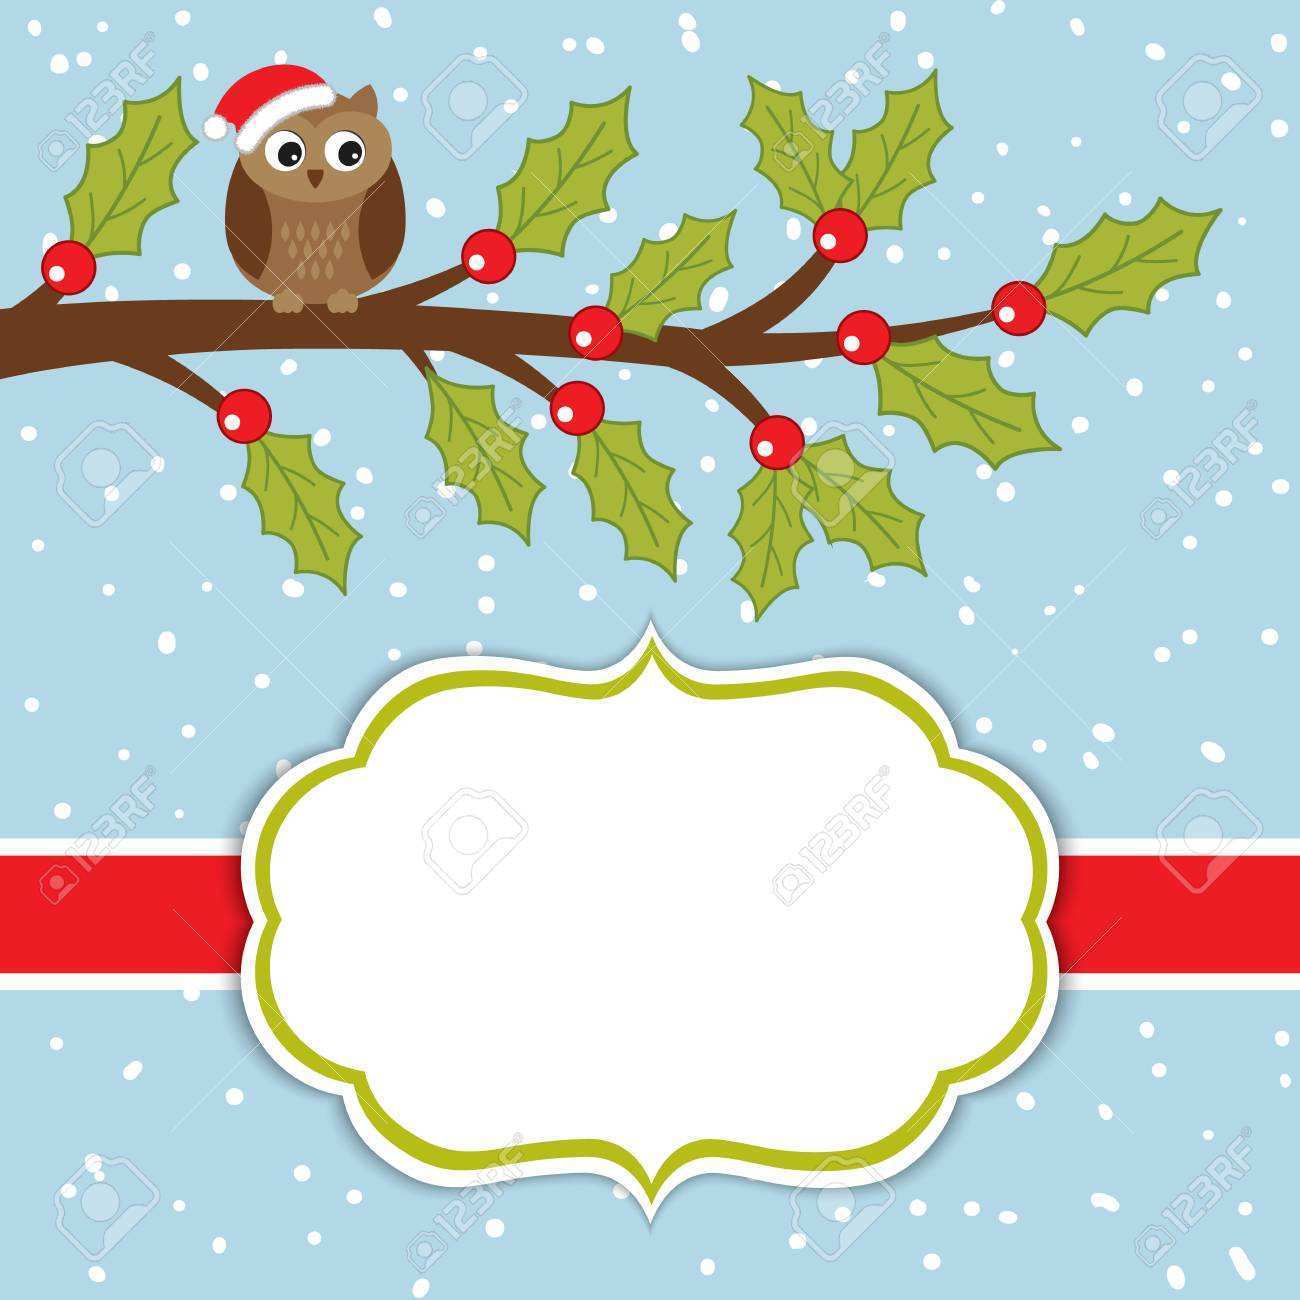 83 Online Owl Christmas Card Template for Owl Christmas Card Template